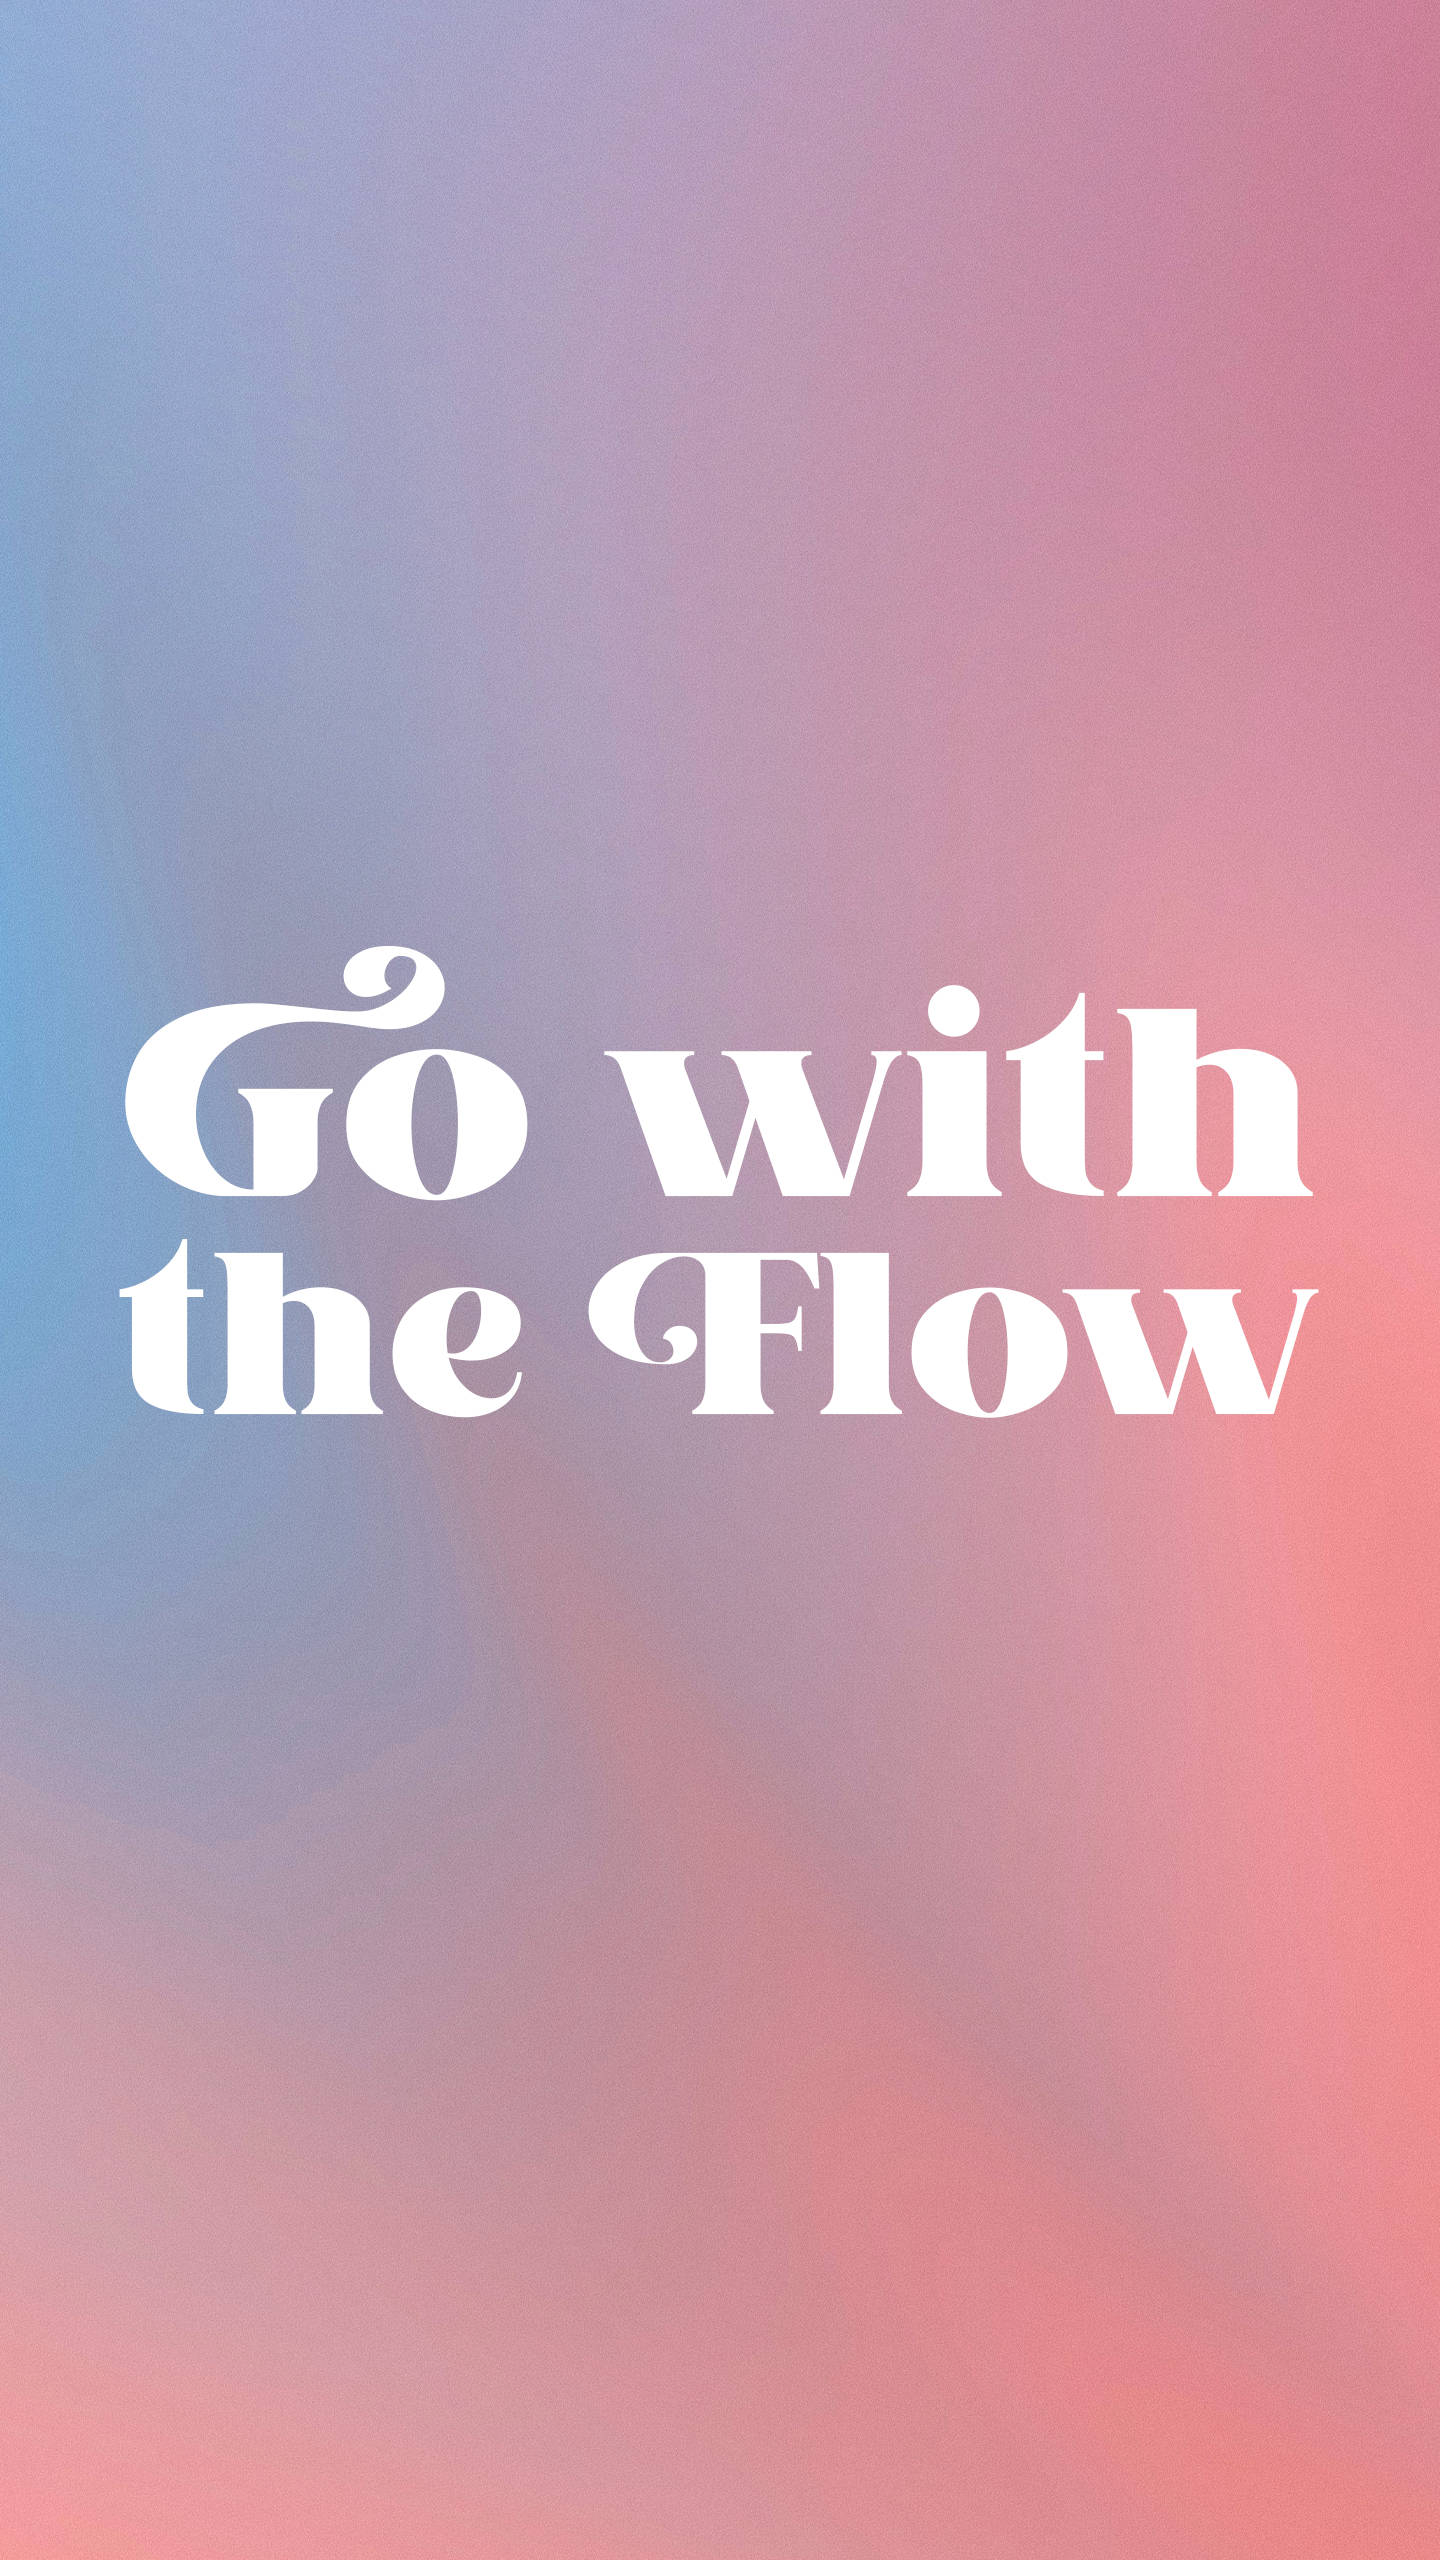 Go With The Flow 80s Retro Vintage Wallpaper